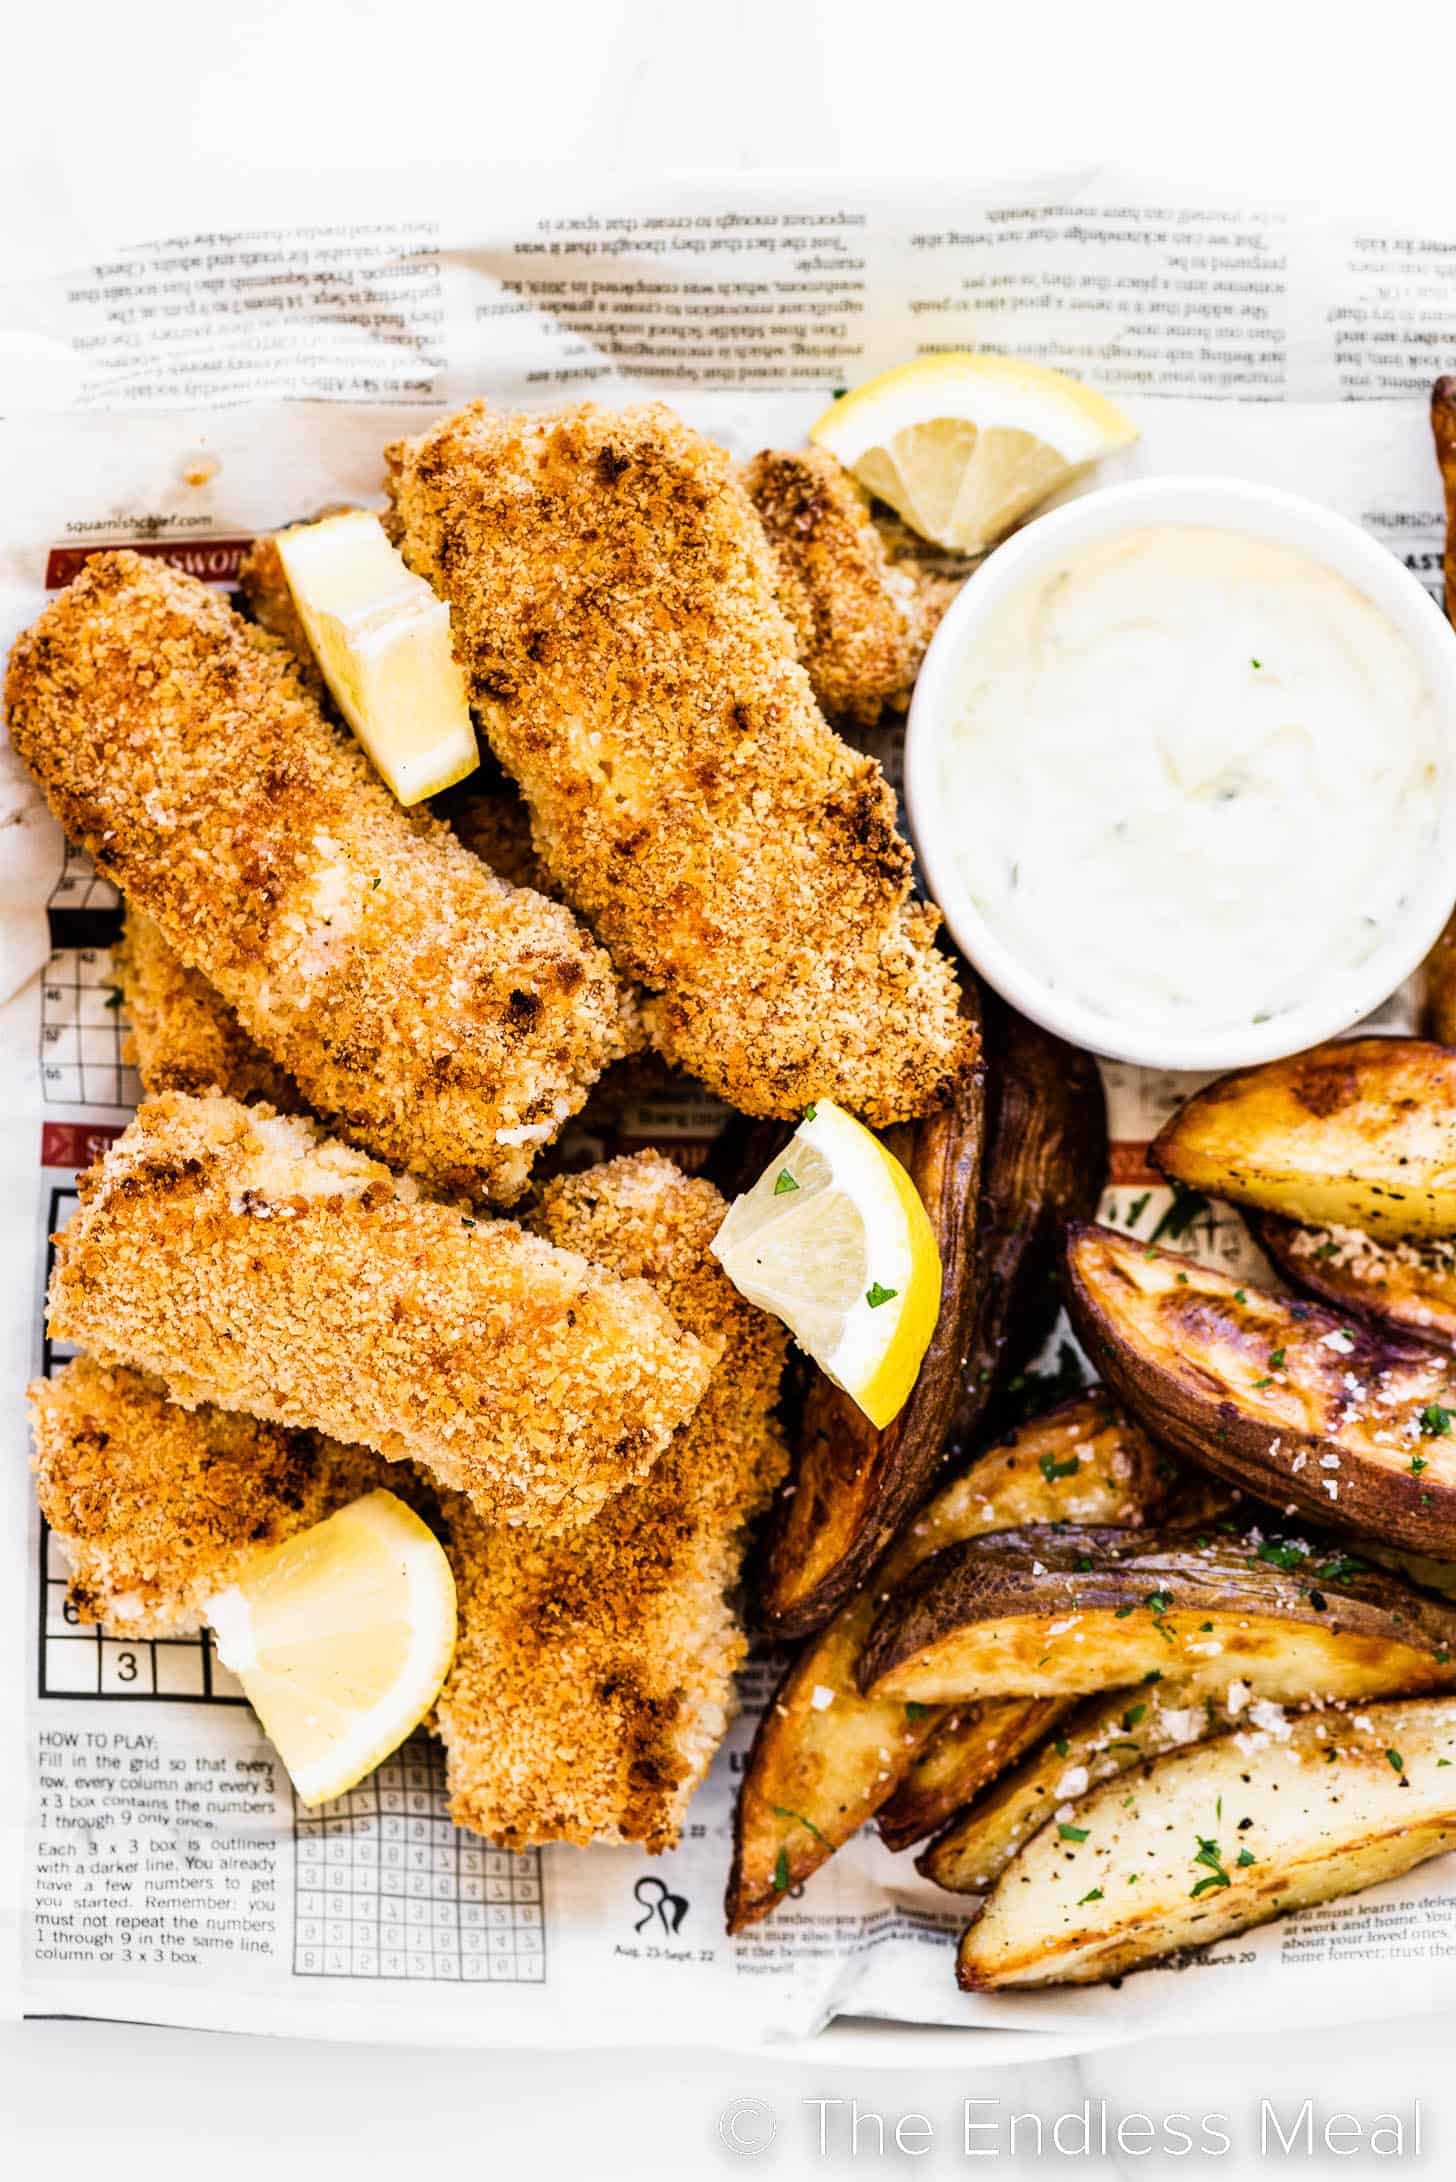 a platter of baked fish and chips with tartar sauce